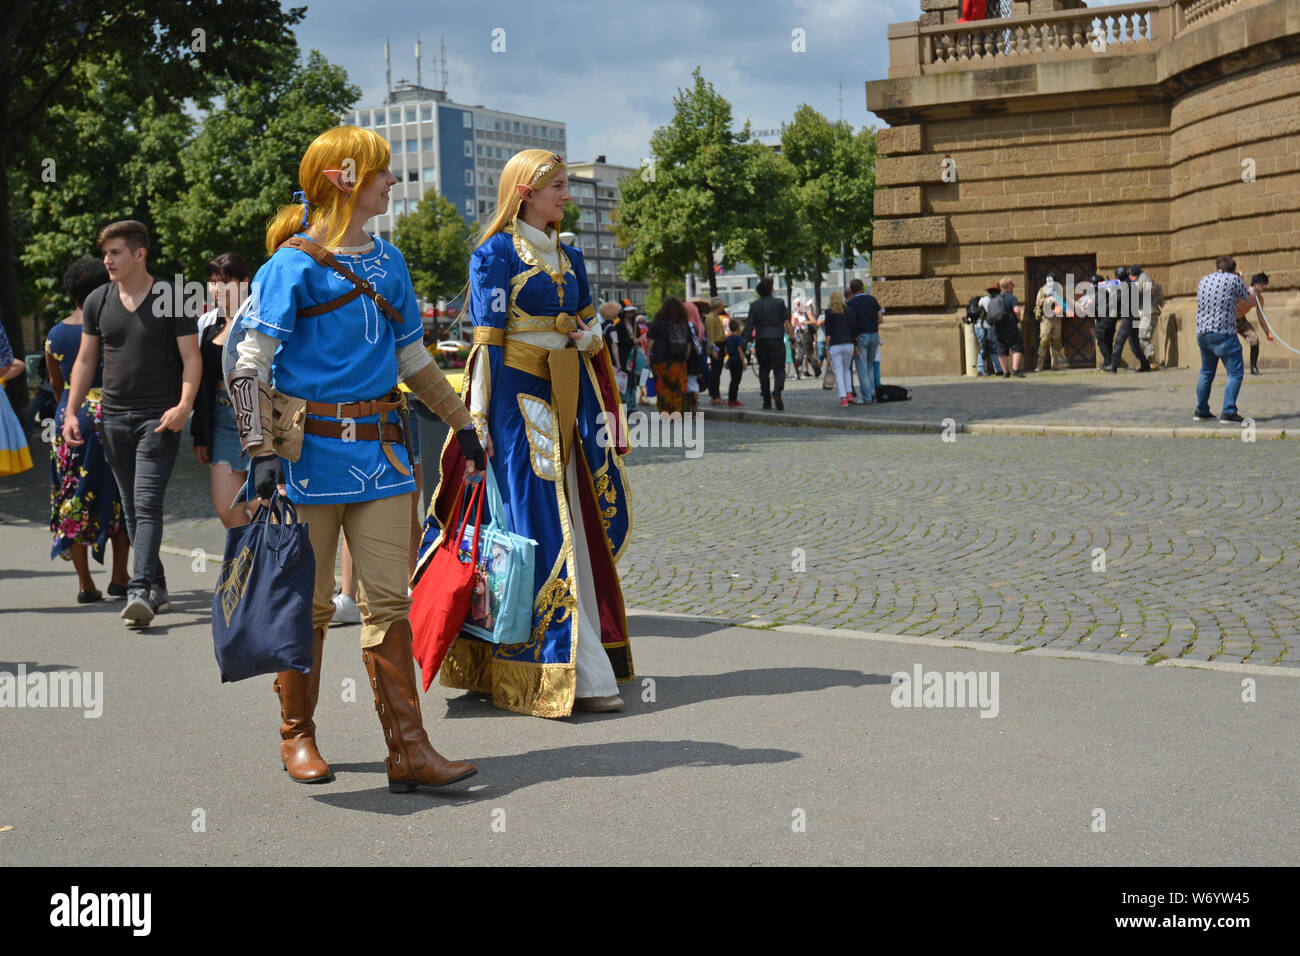 Mannheim, Germany - August 2019: Cosplayers walking by at public park in front of water tower in Mannheim during anual anime and manga convention Stock Photo